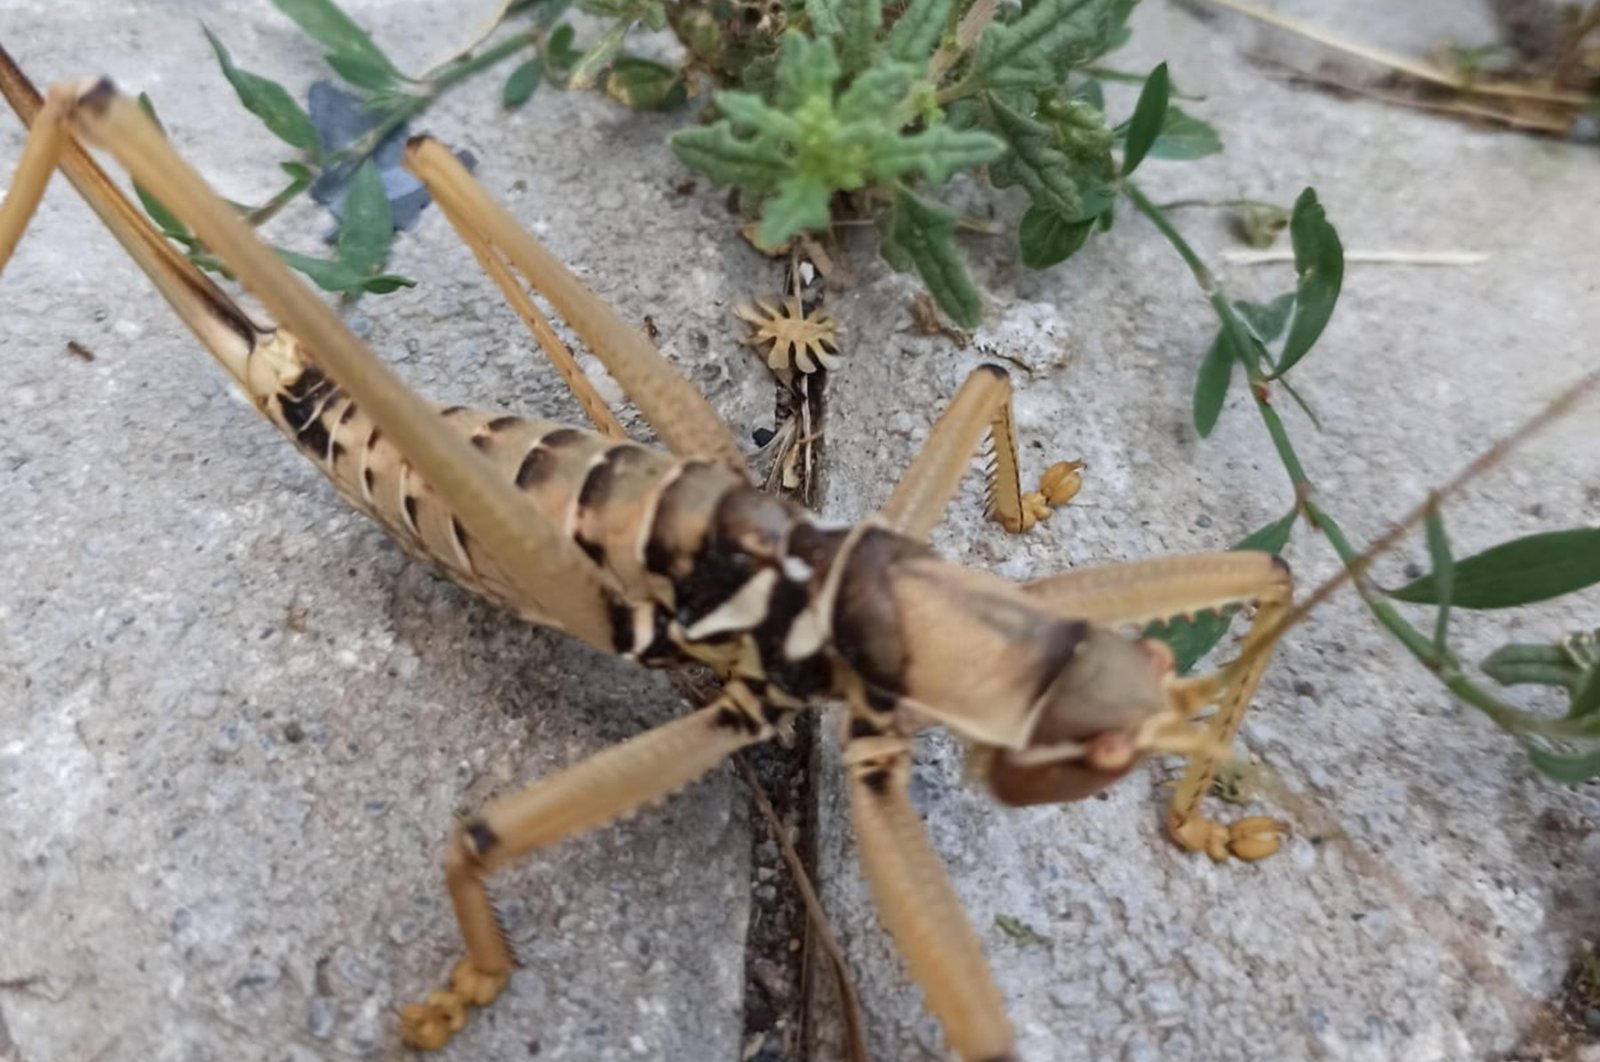 The frightening size of the saga ephippigera shocked social media users across Turkey after the discovery of the rare cricket in Tunceli, July 11, 2020 (DHA Photo)